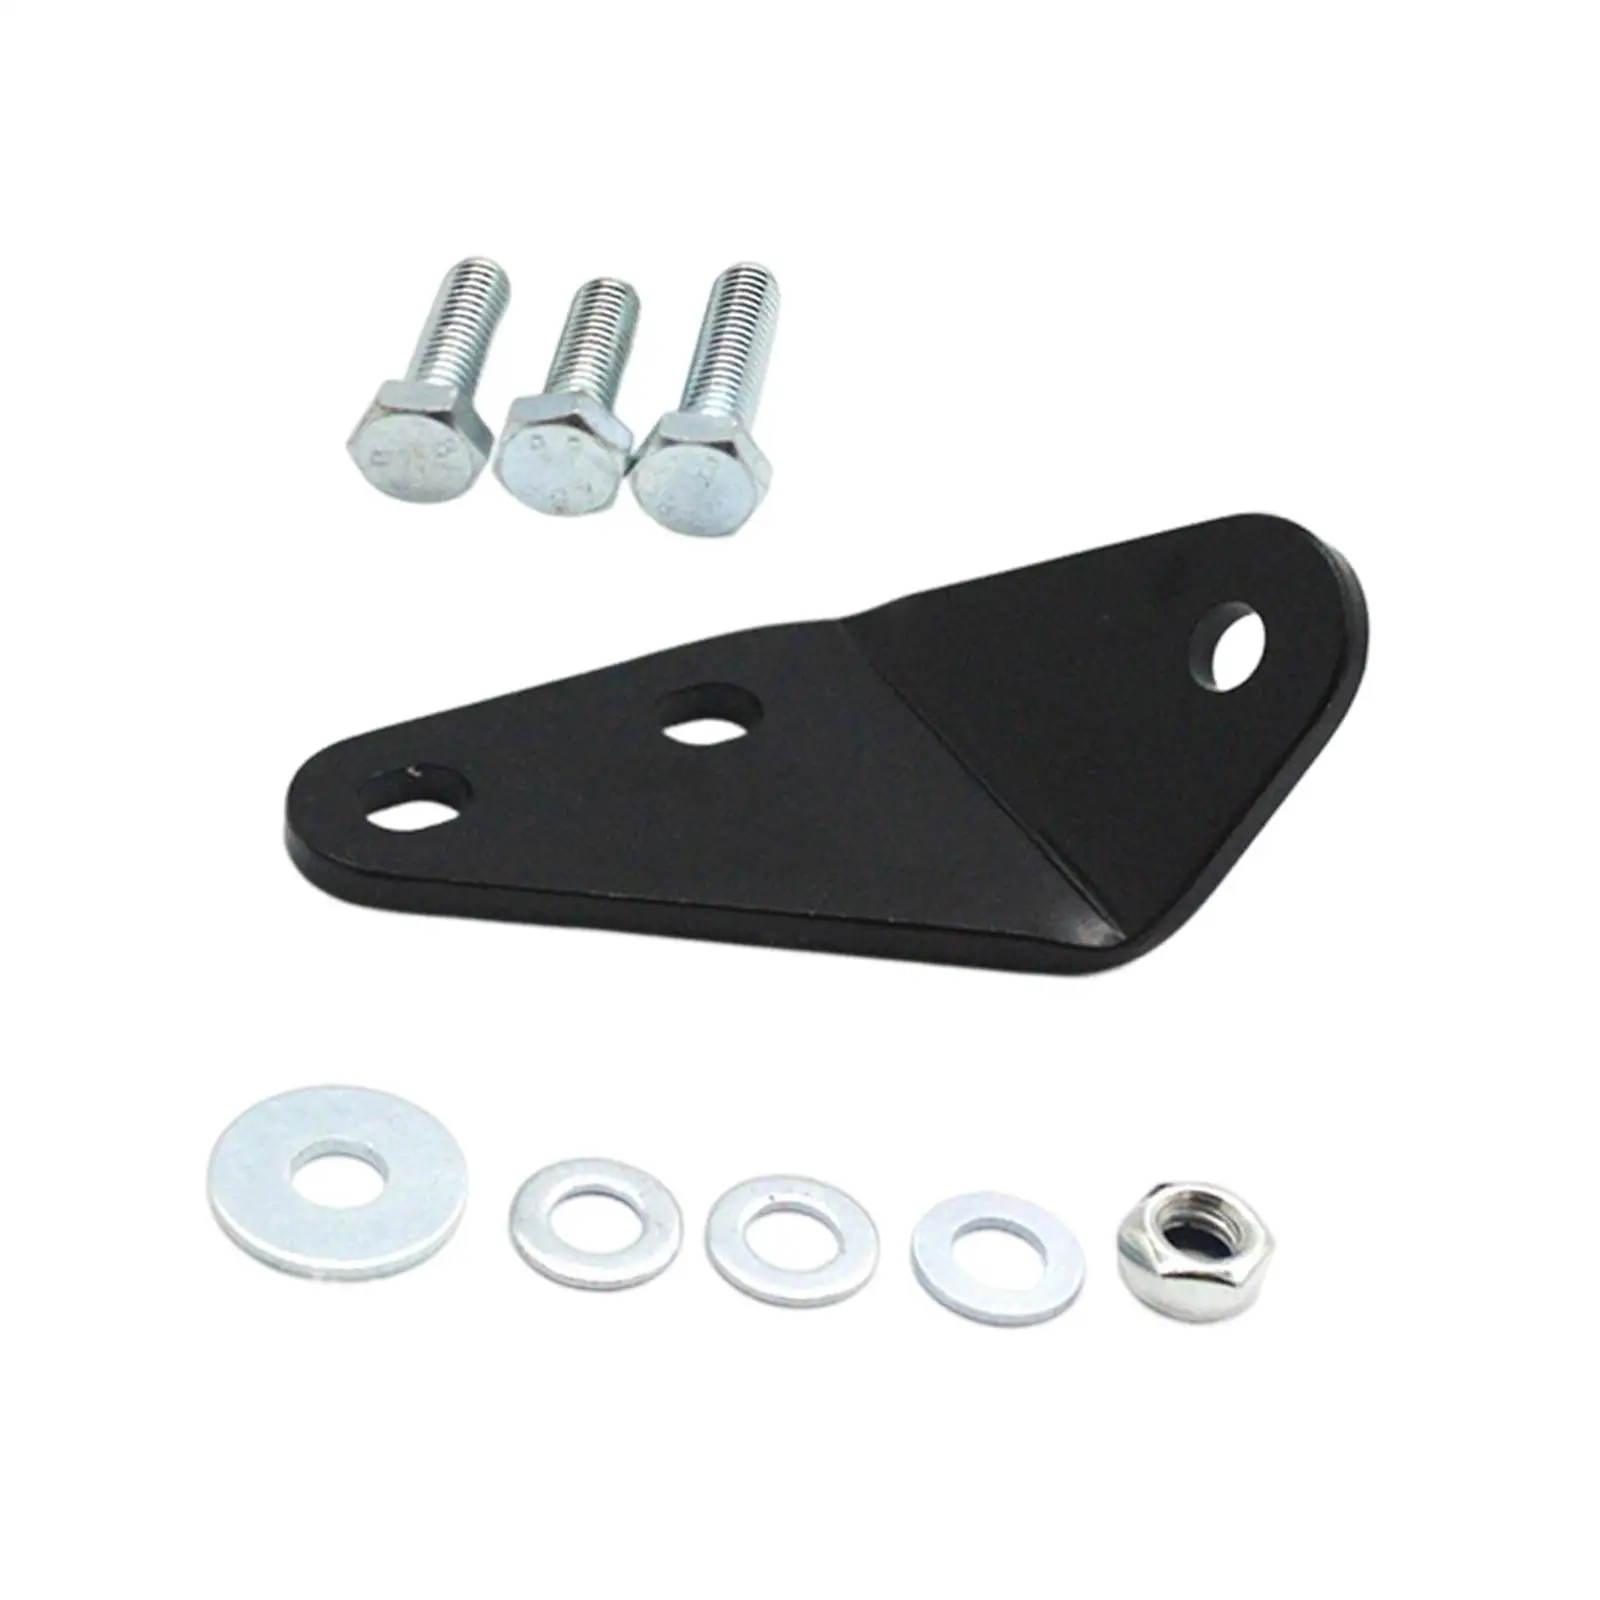 Clutch Pedal Bracket Replace Parts for VW T4 Transporter Caravelle